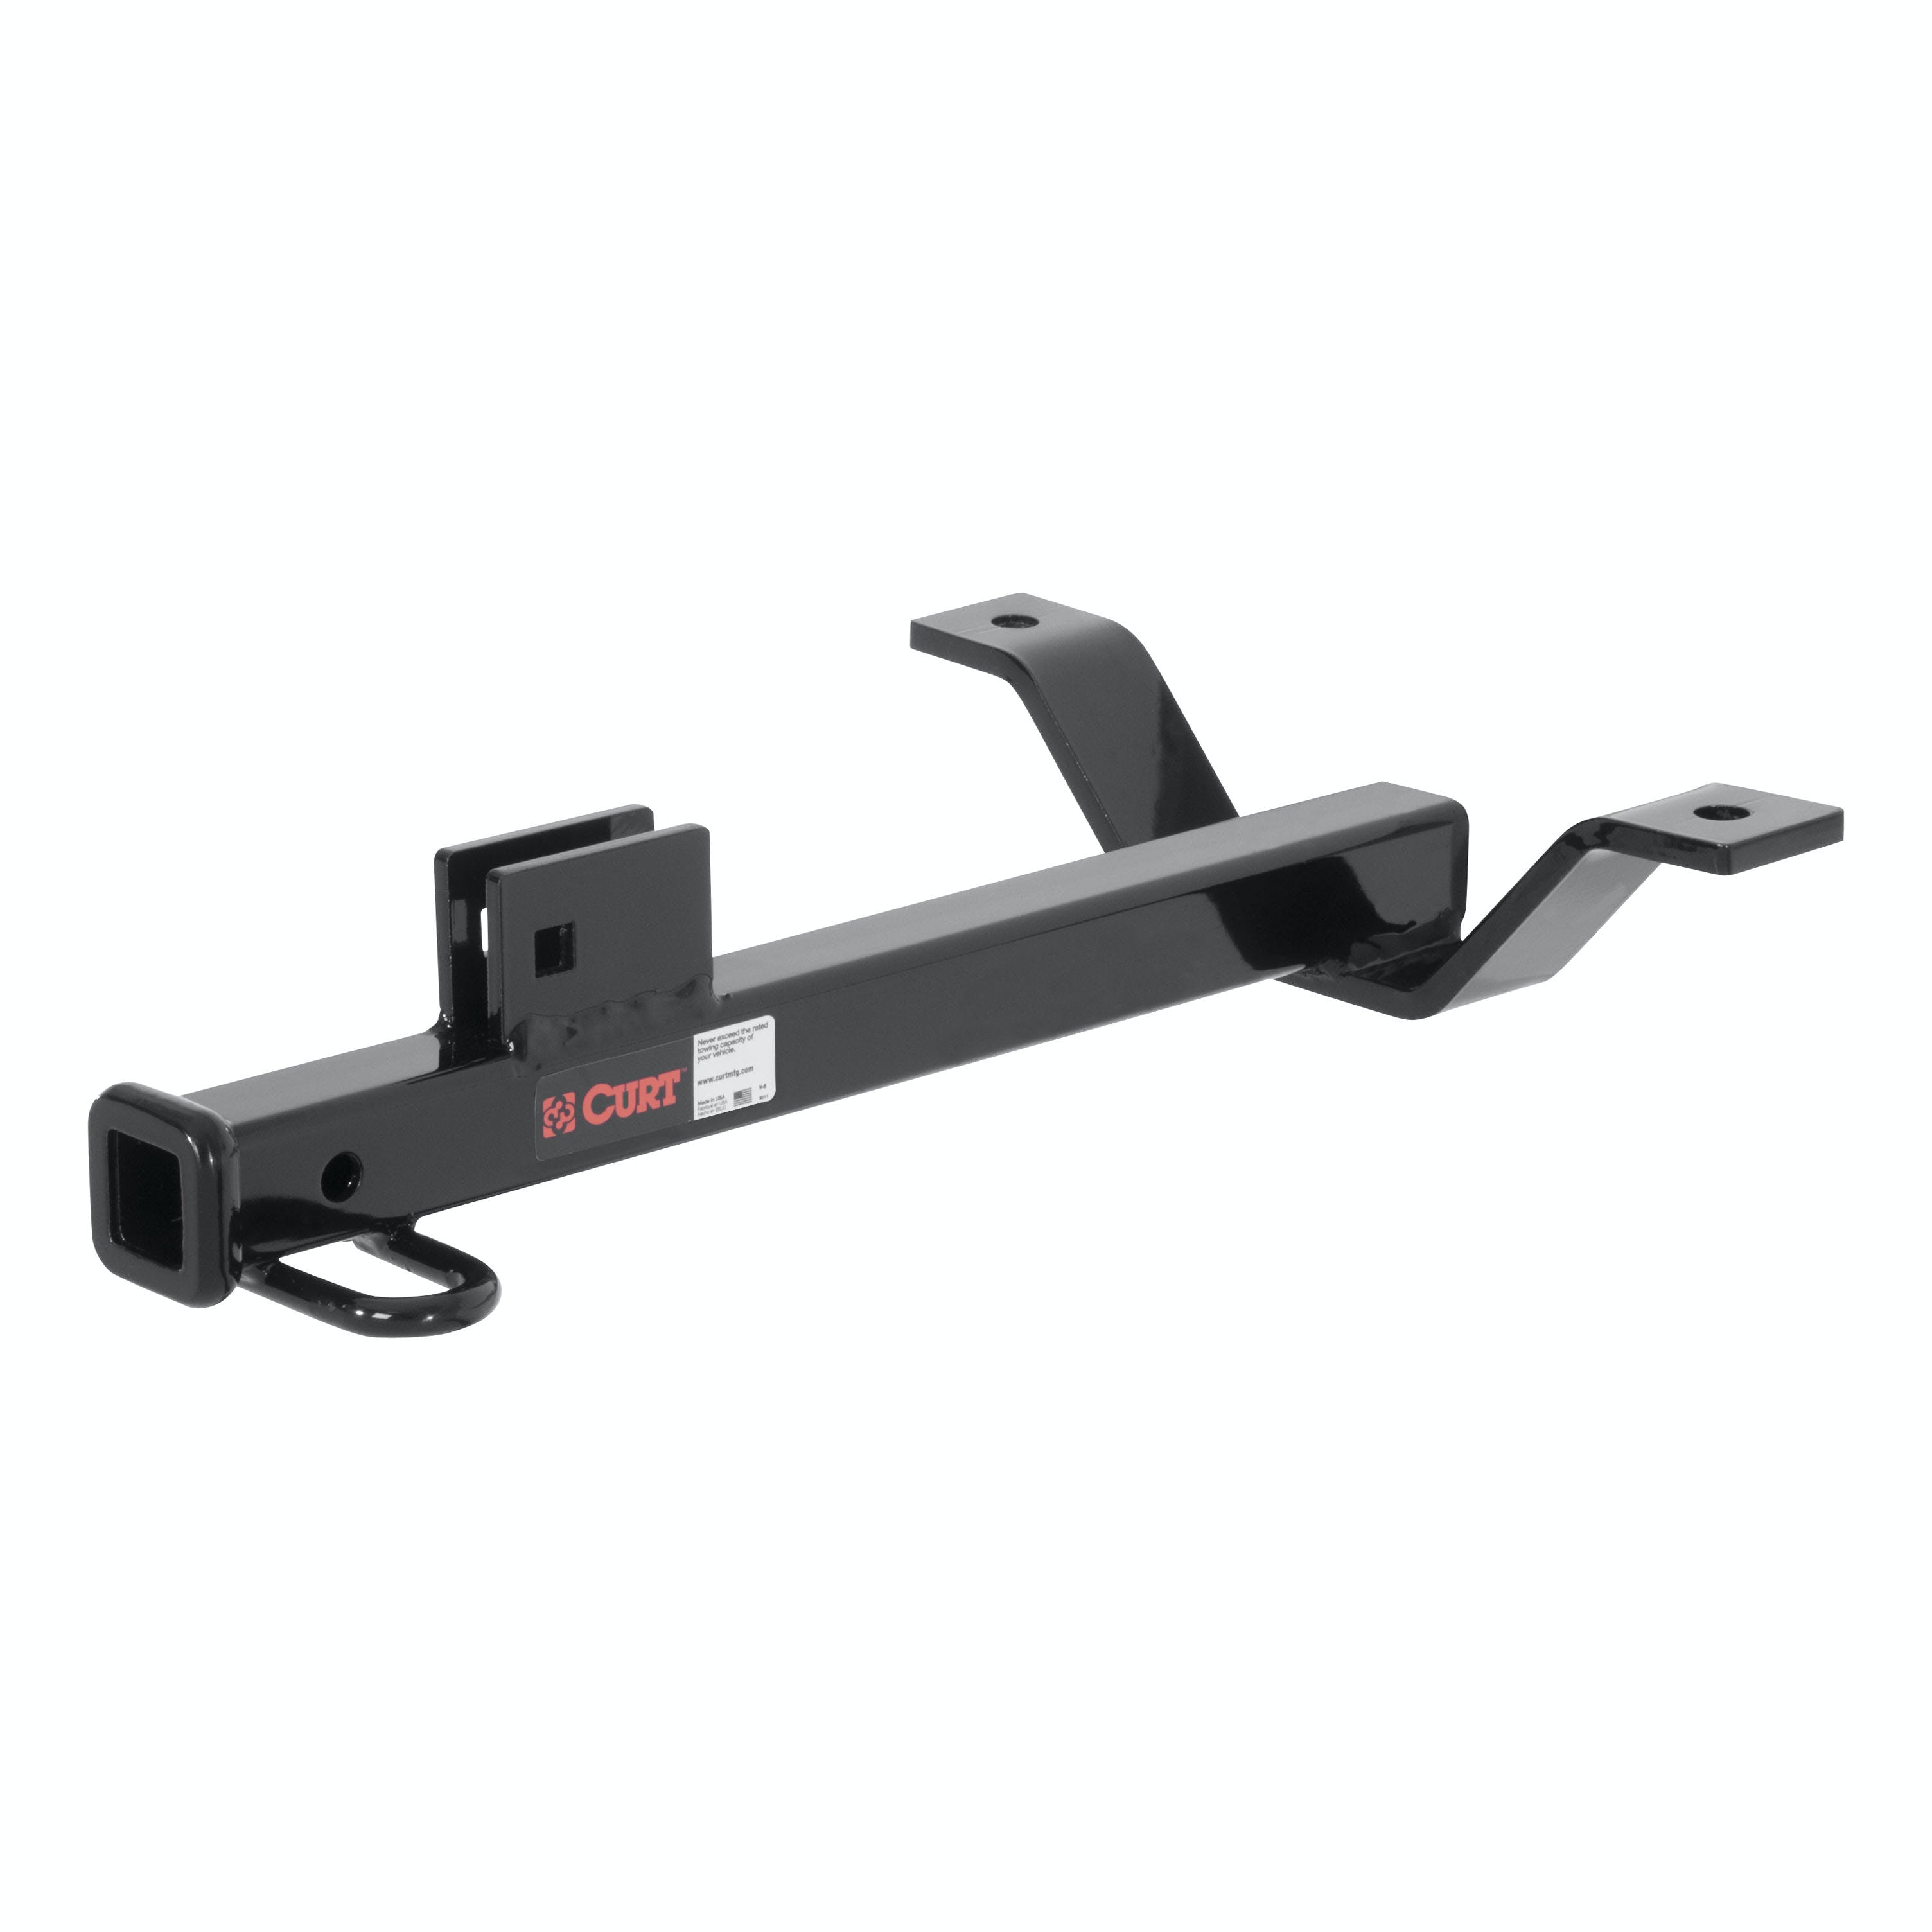 CURT 11336 Class 1 Trailer Hitch, 1-1/4 Receiver, Select Acura RL